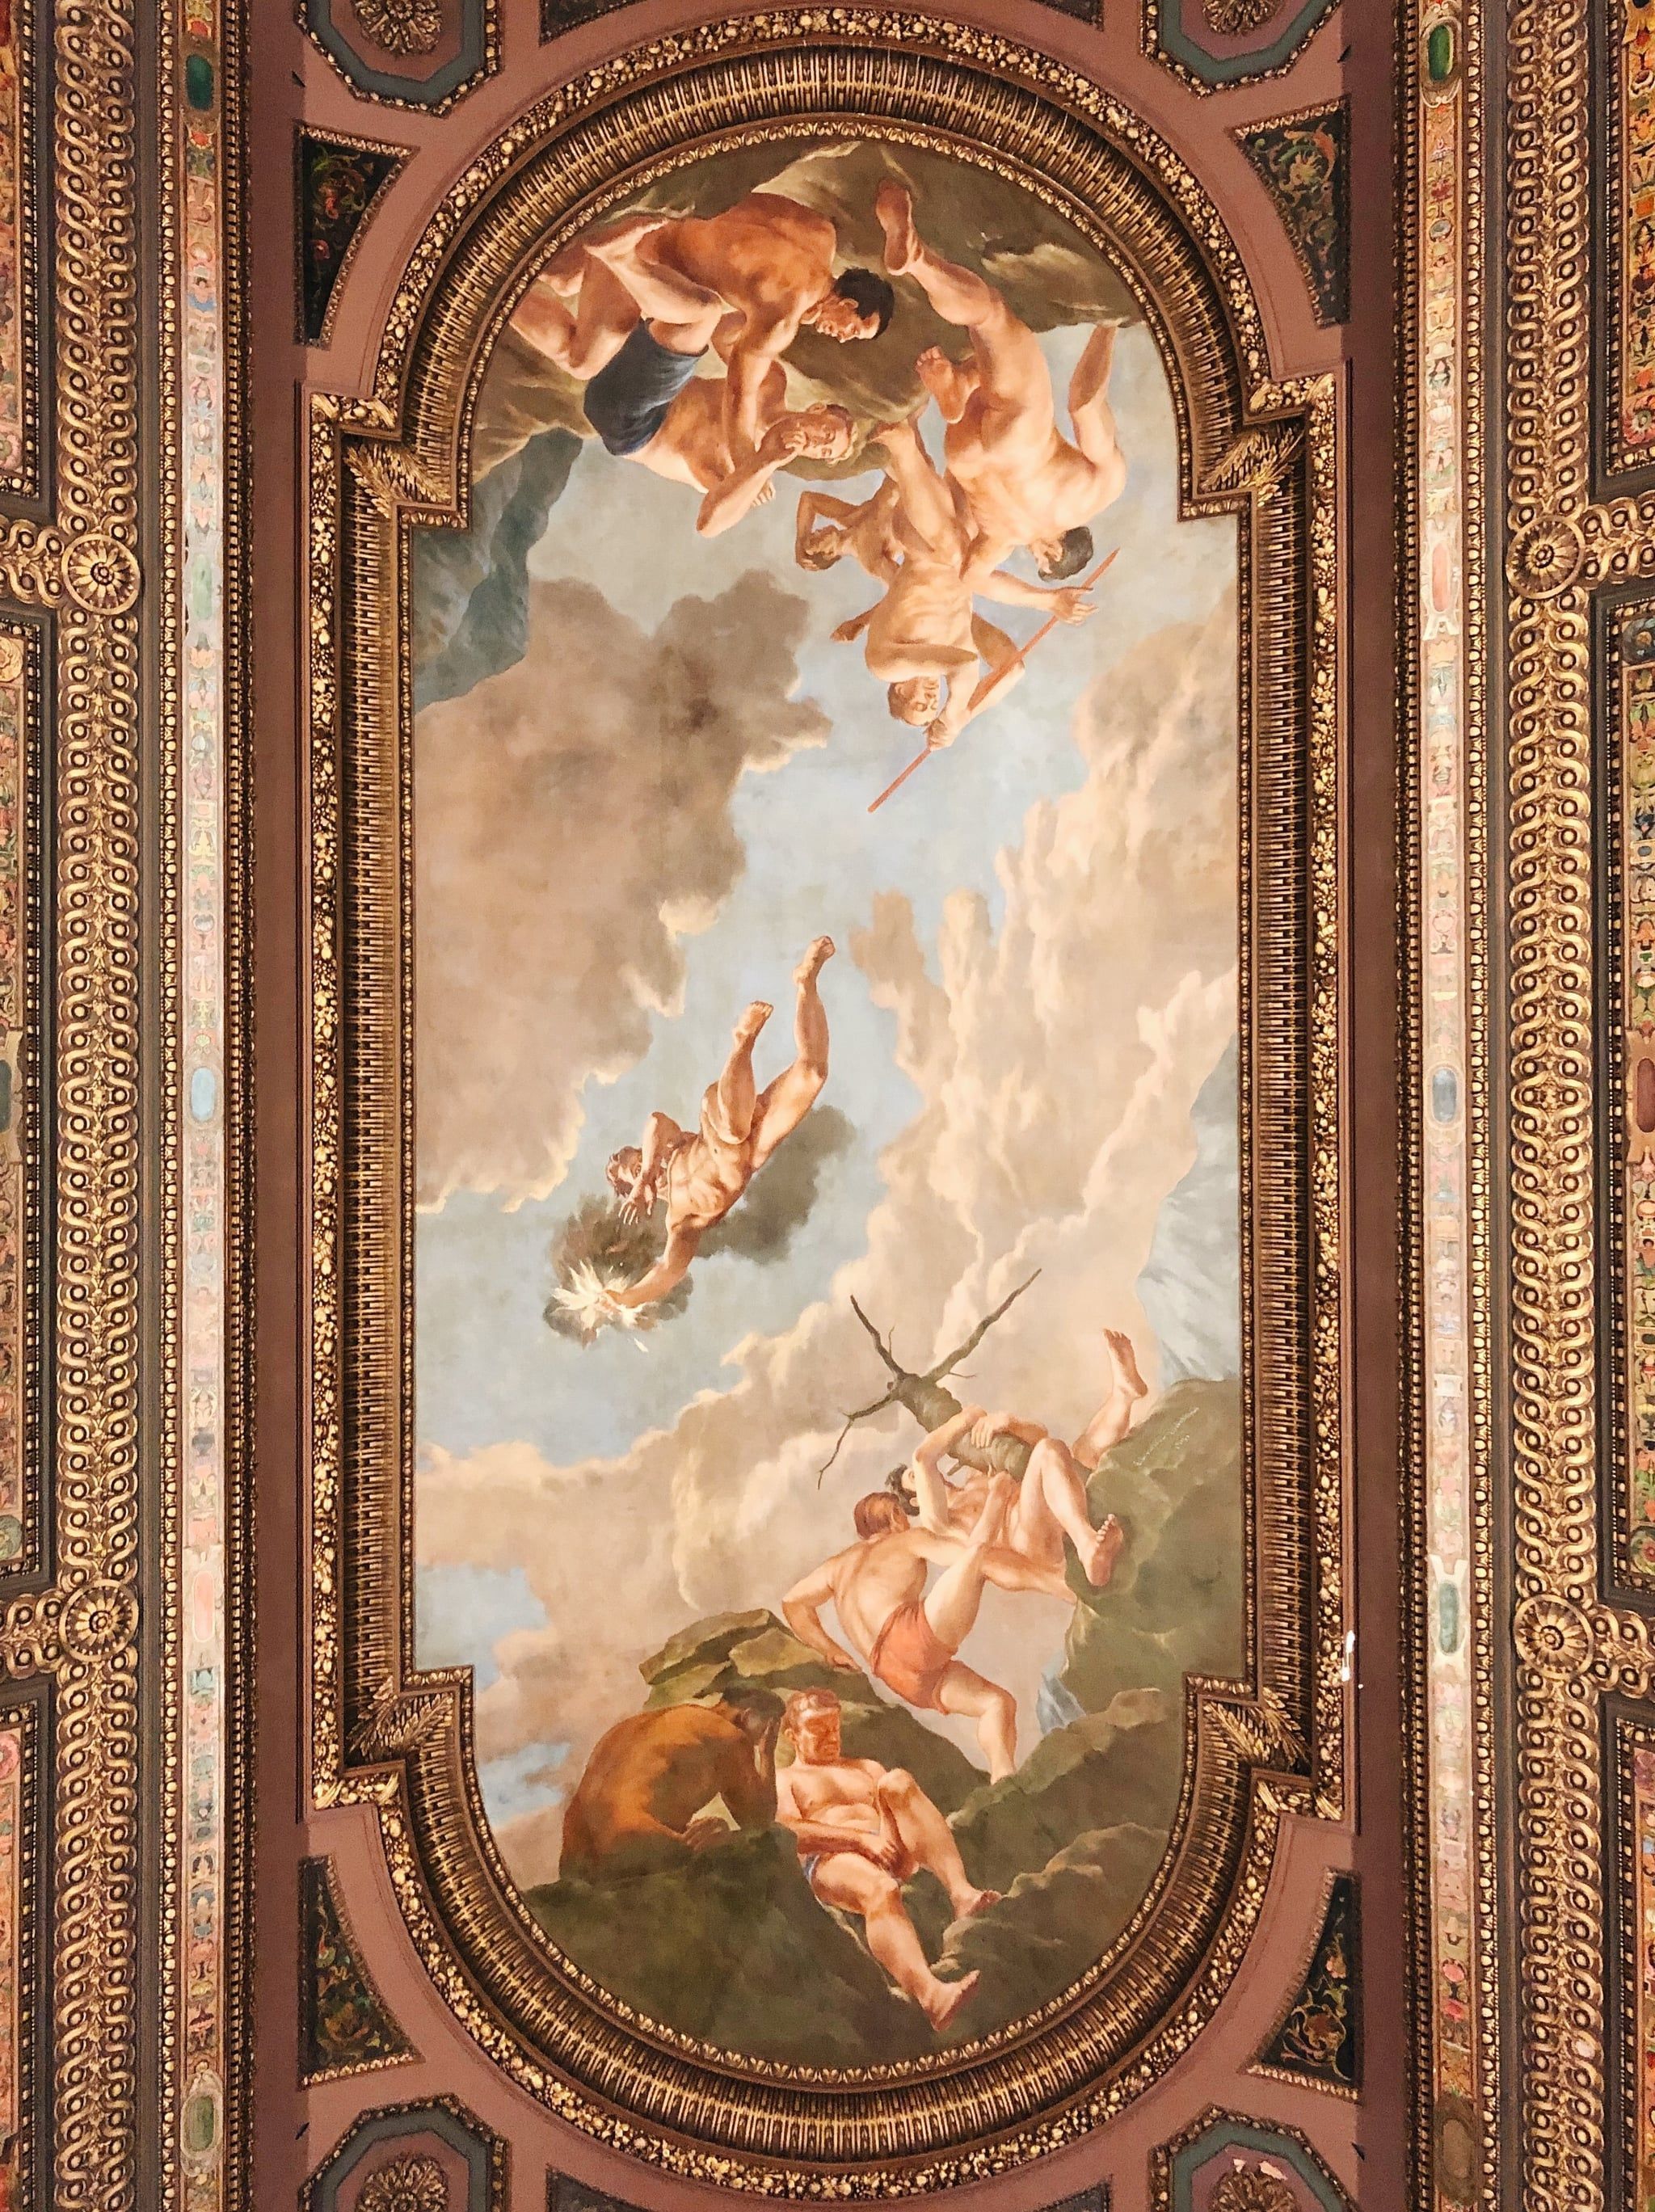 A painting of the gods on an ornate ceiling - Royalcore